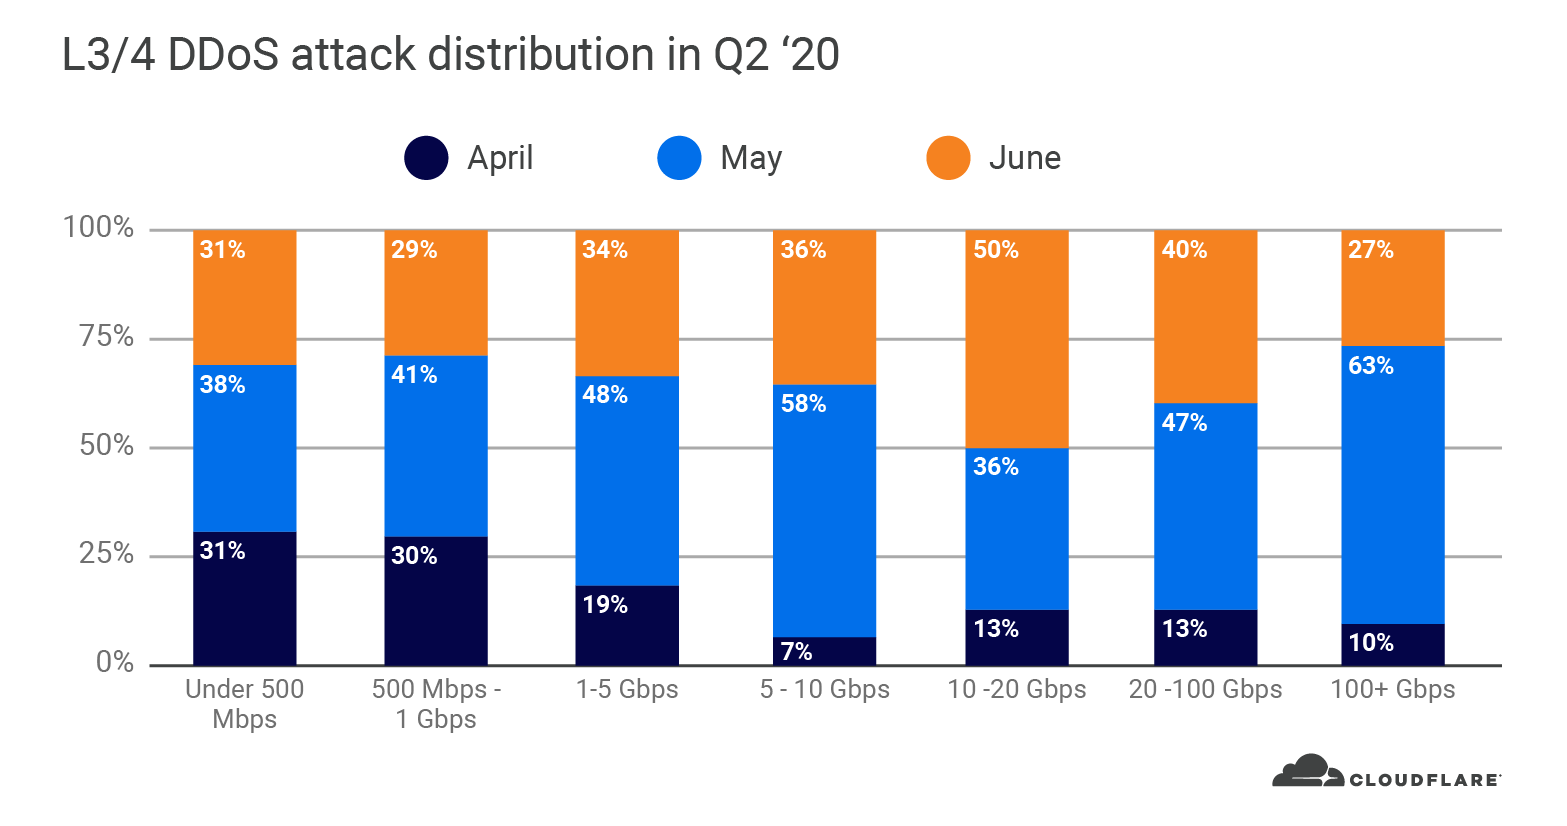 Network-layer DDoS attack trends for Q2 2020